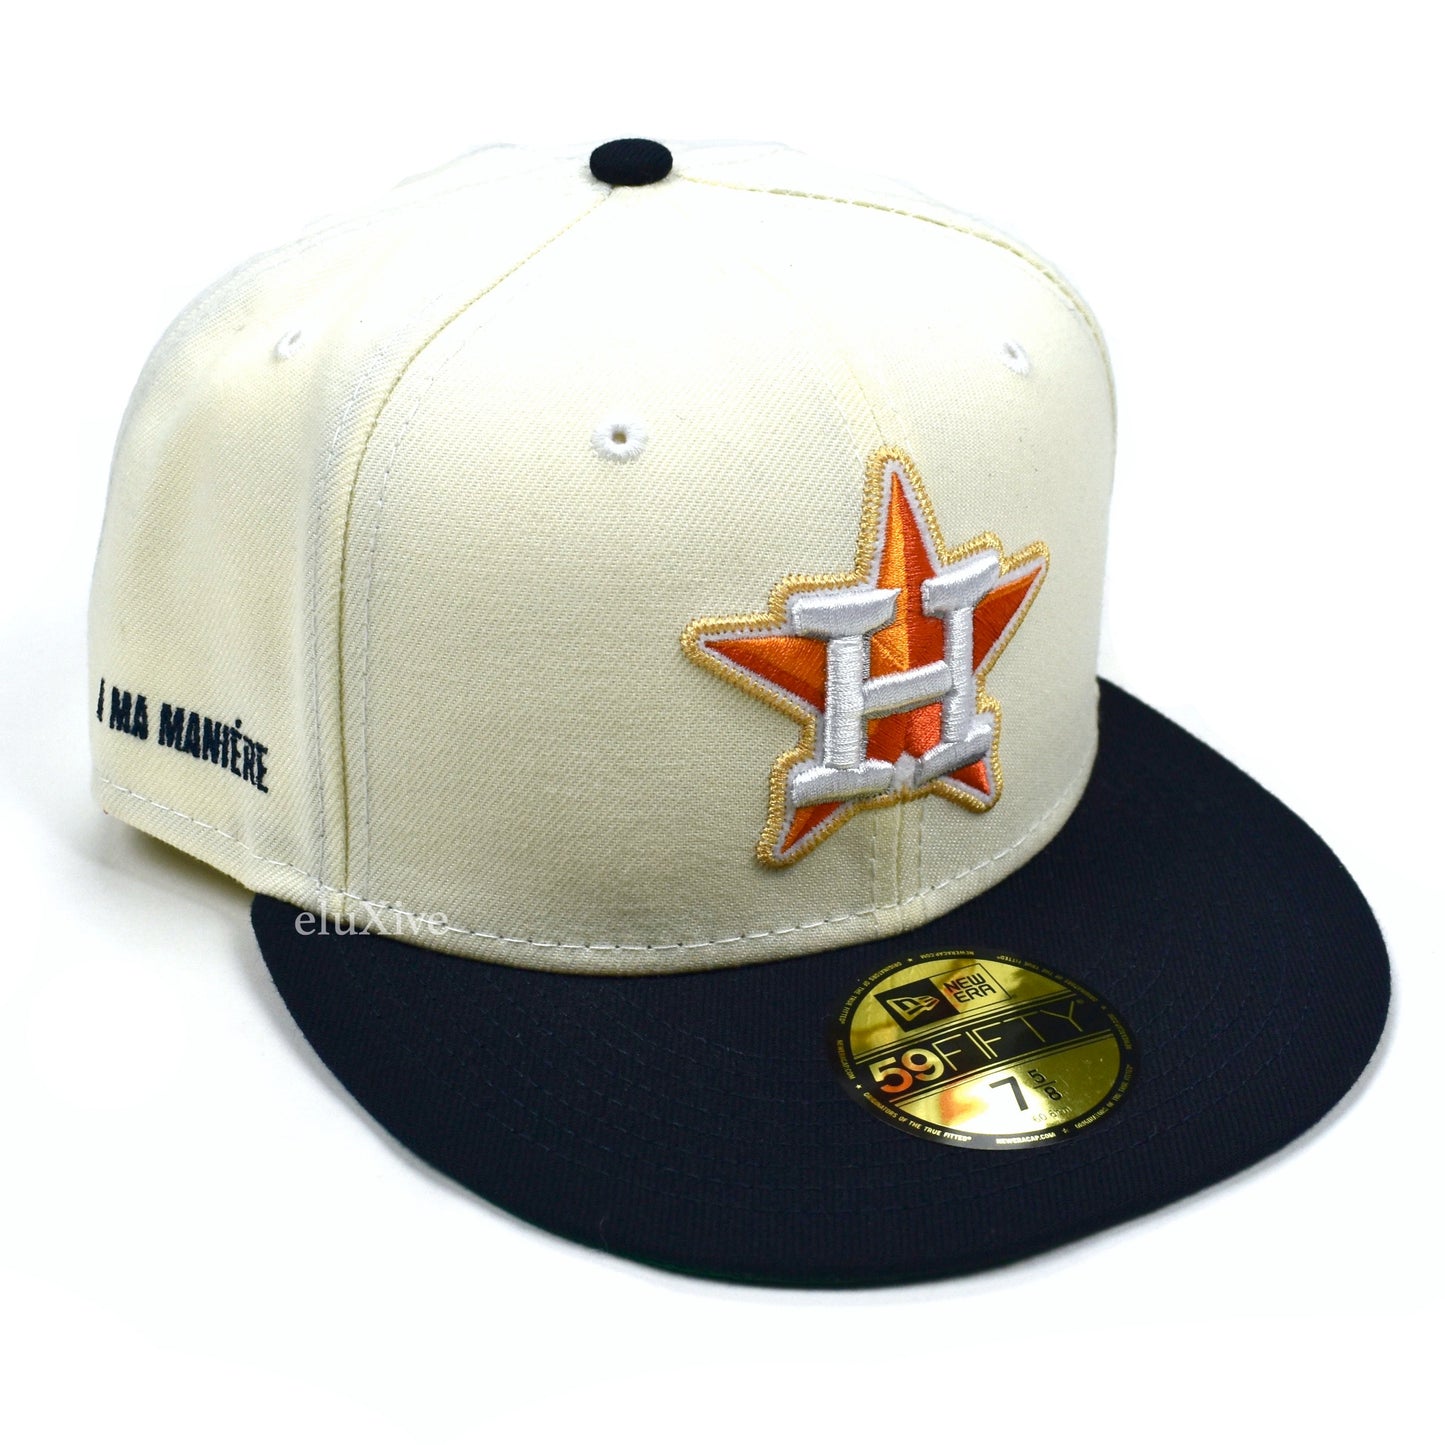 A Ma Maniere x New Era - Houston Astros Fitted Hat (Navy Bill)